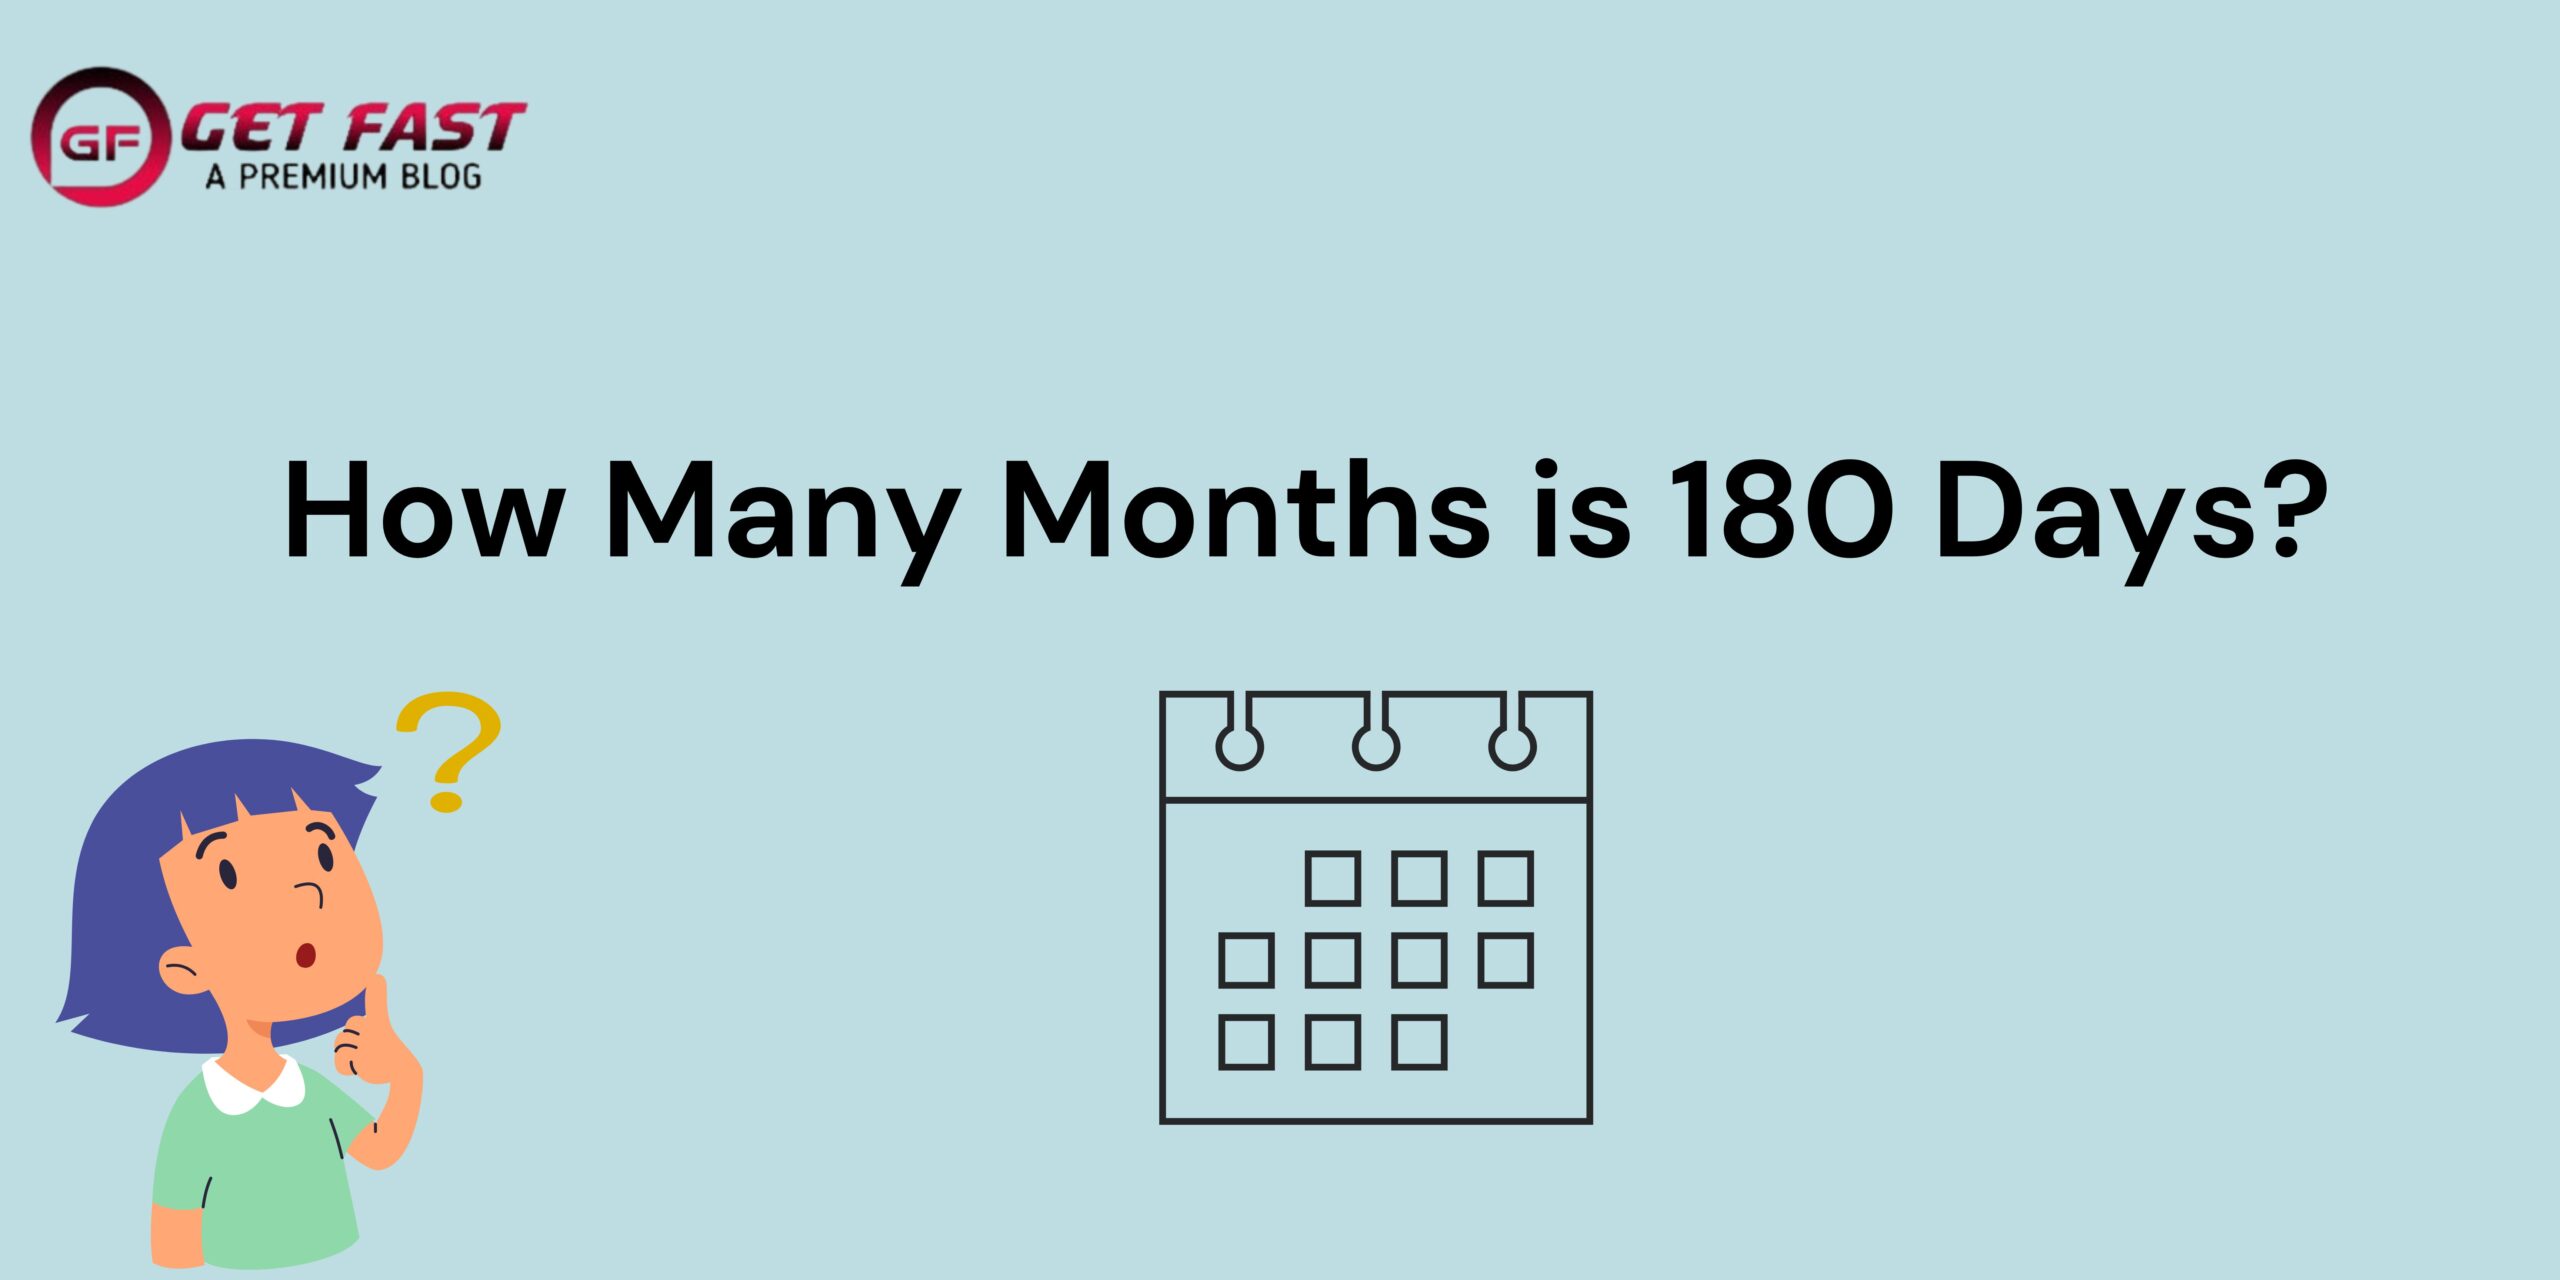 How Many Months is 180 Days?